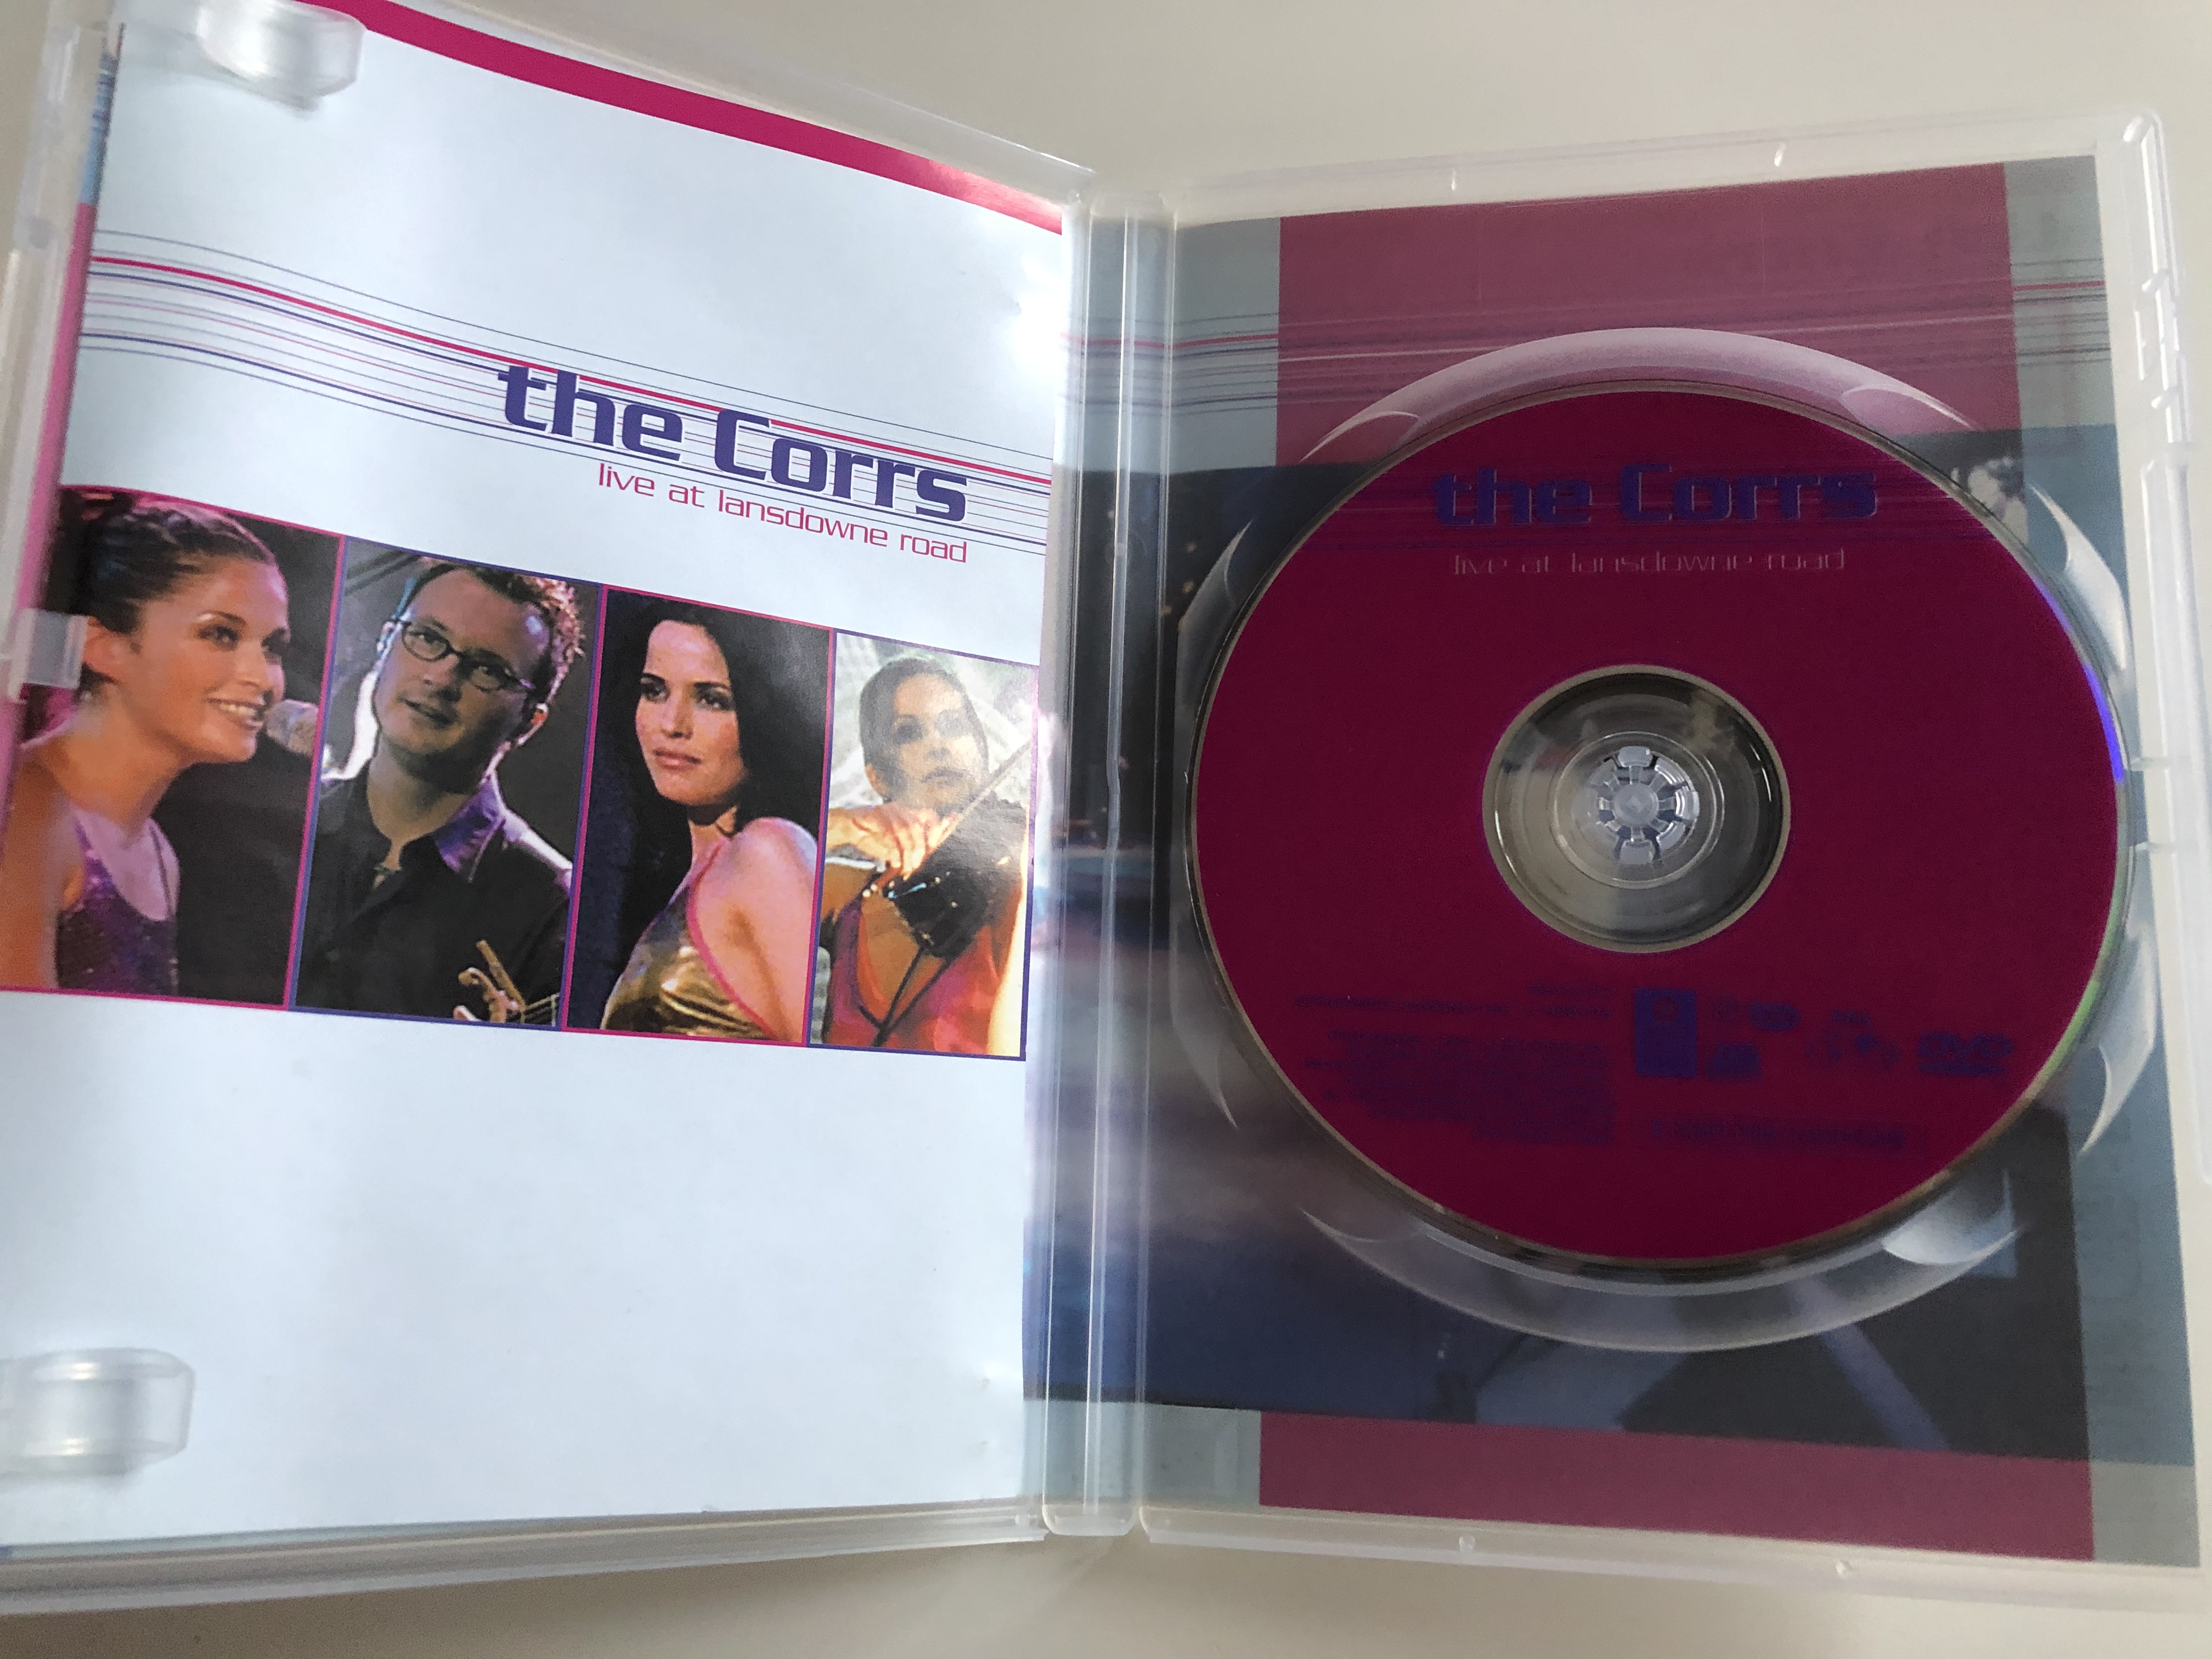 The Corrs DVD 2000 Live at the lansdowne road / Includes "The Corrs - in  Blue" Documentary / Warner Music Vision - bibleinmylanguage